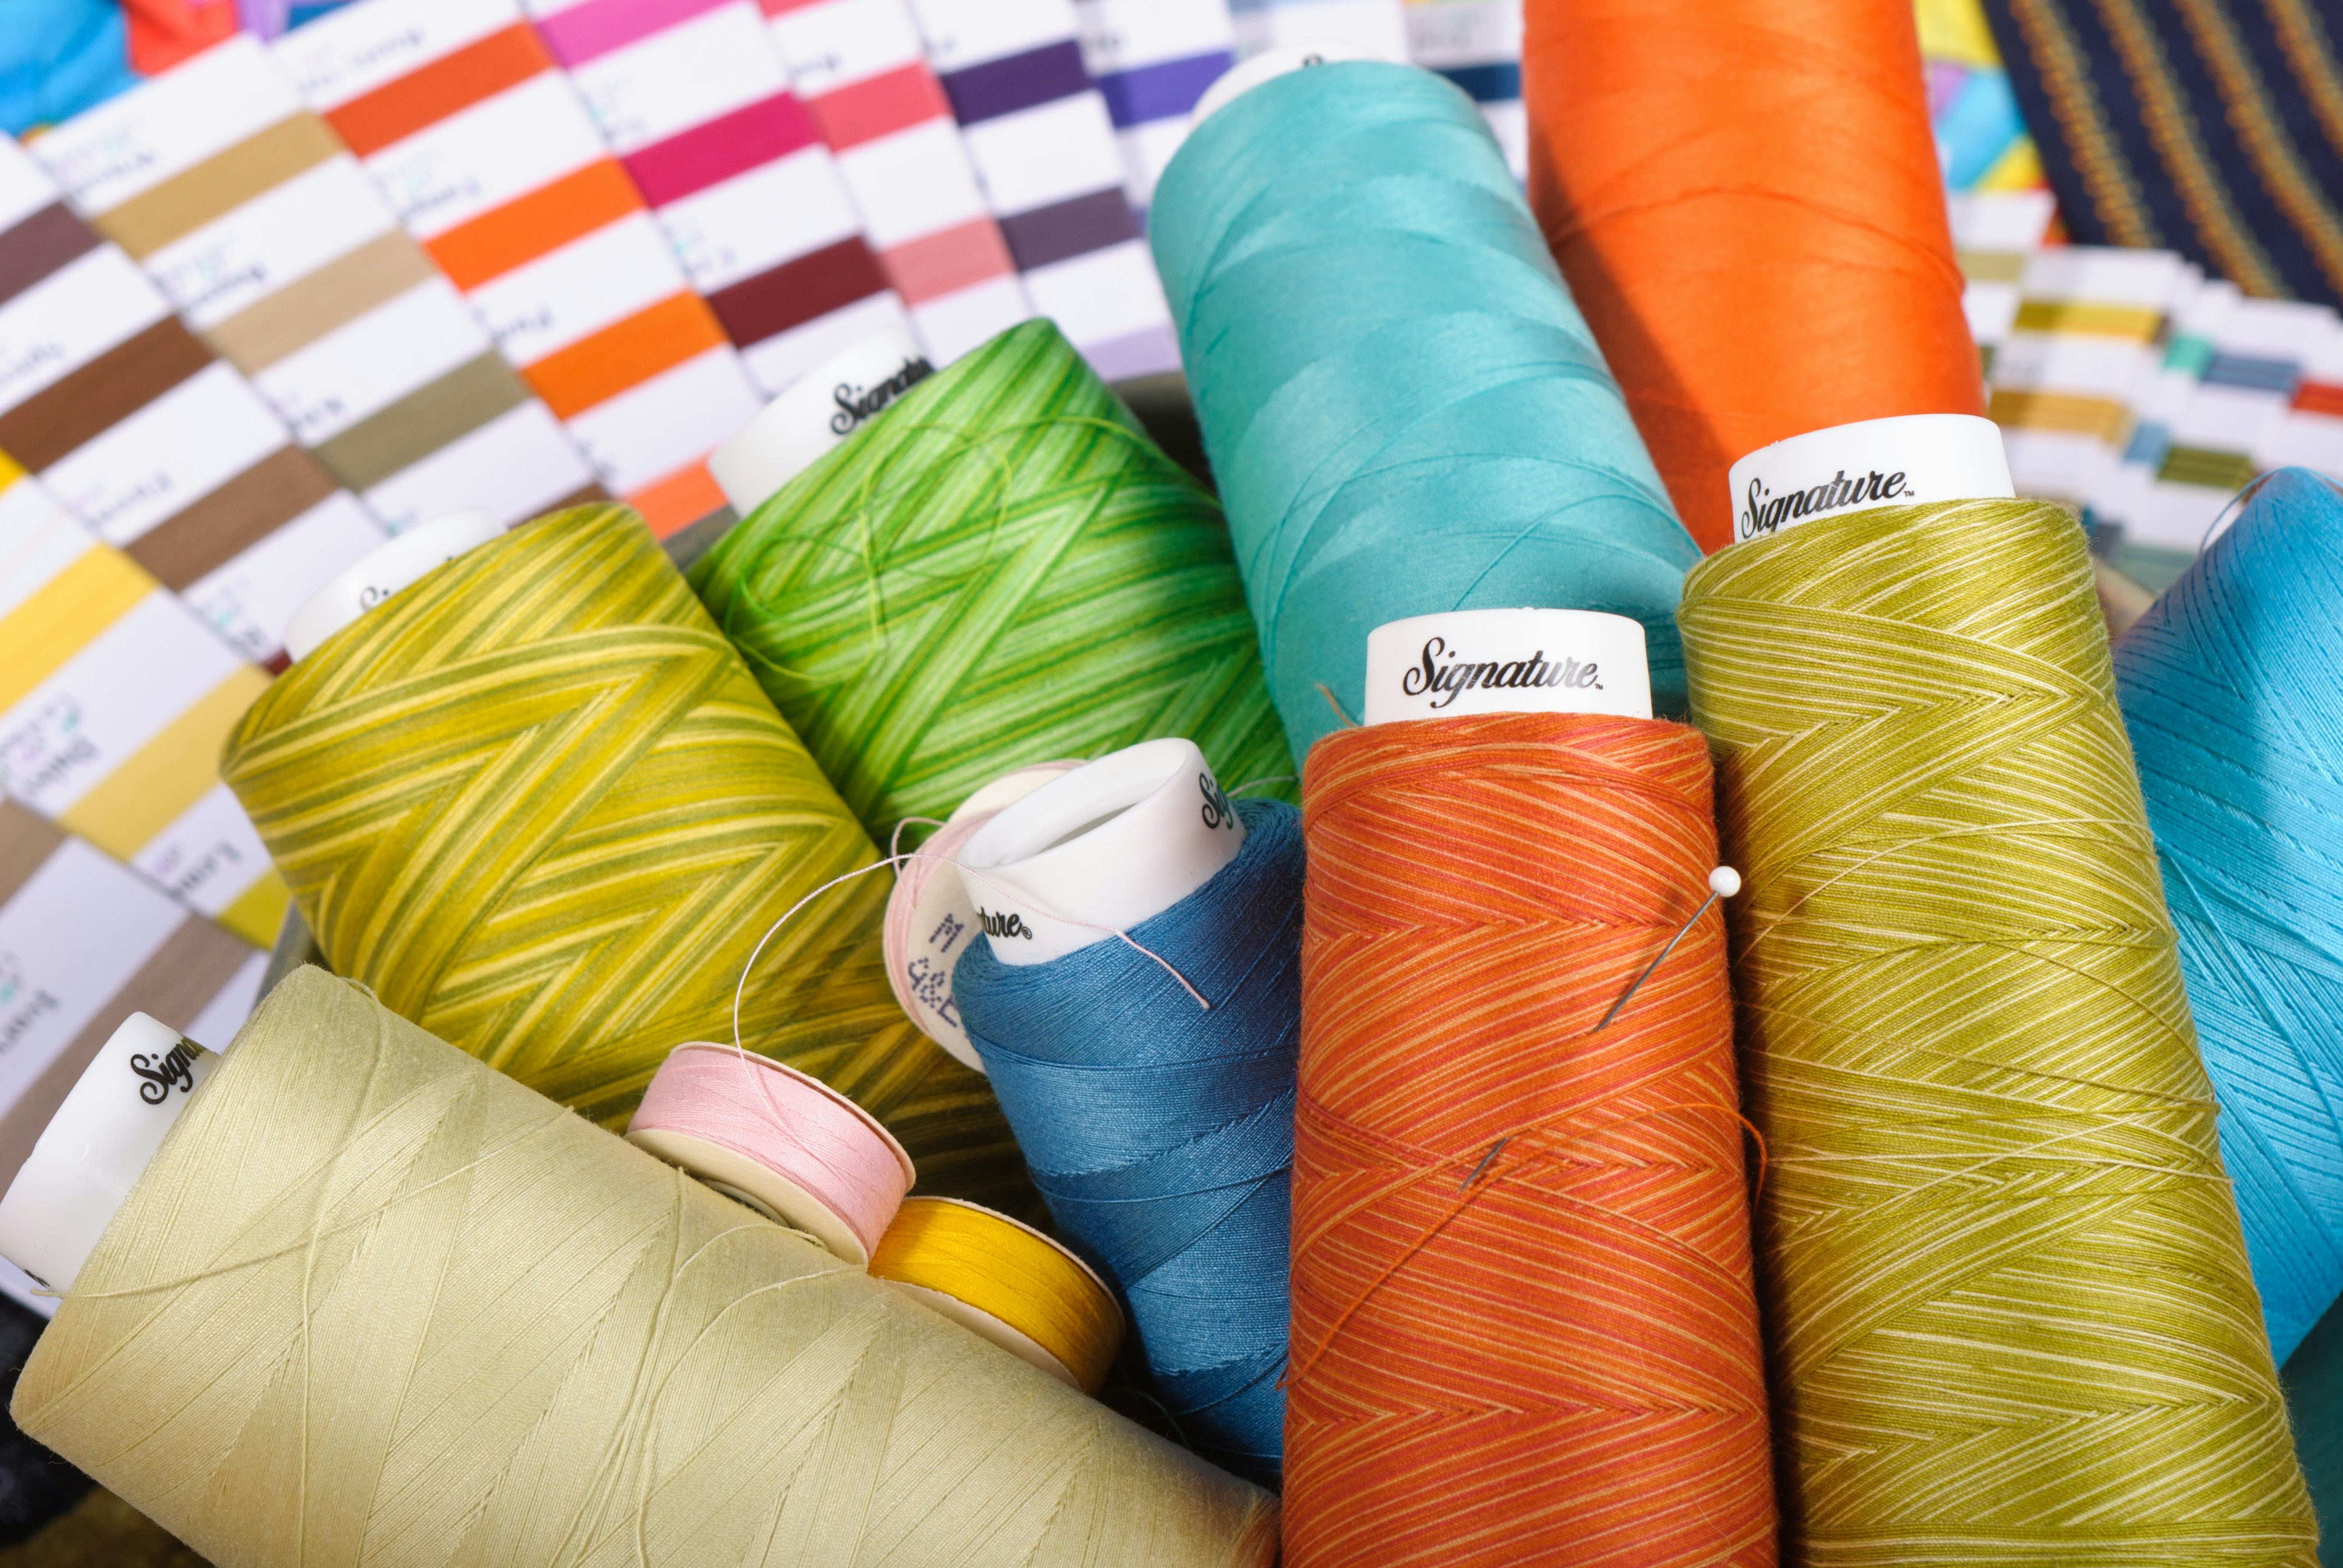 Sewing, quilting, and embroidery threads with swatches.